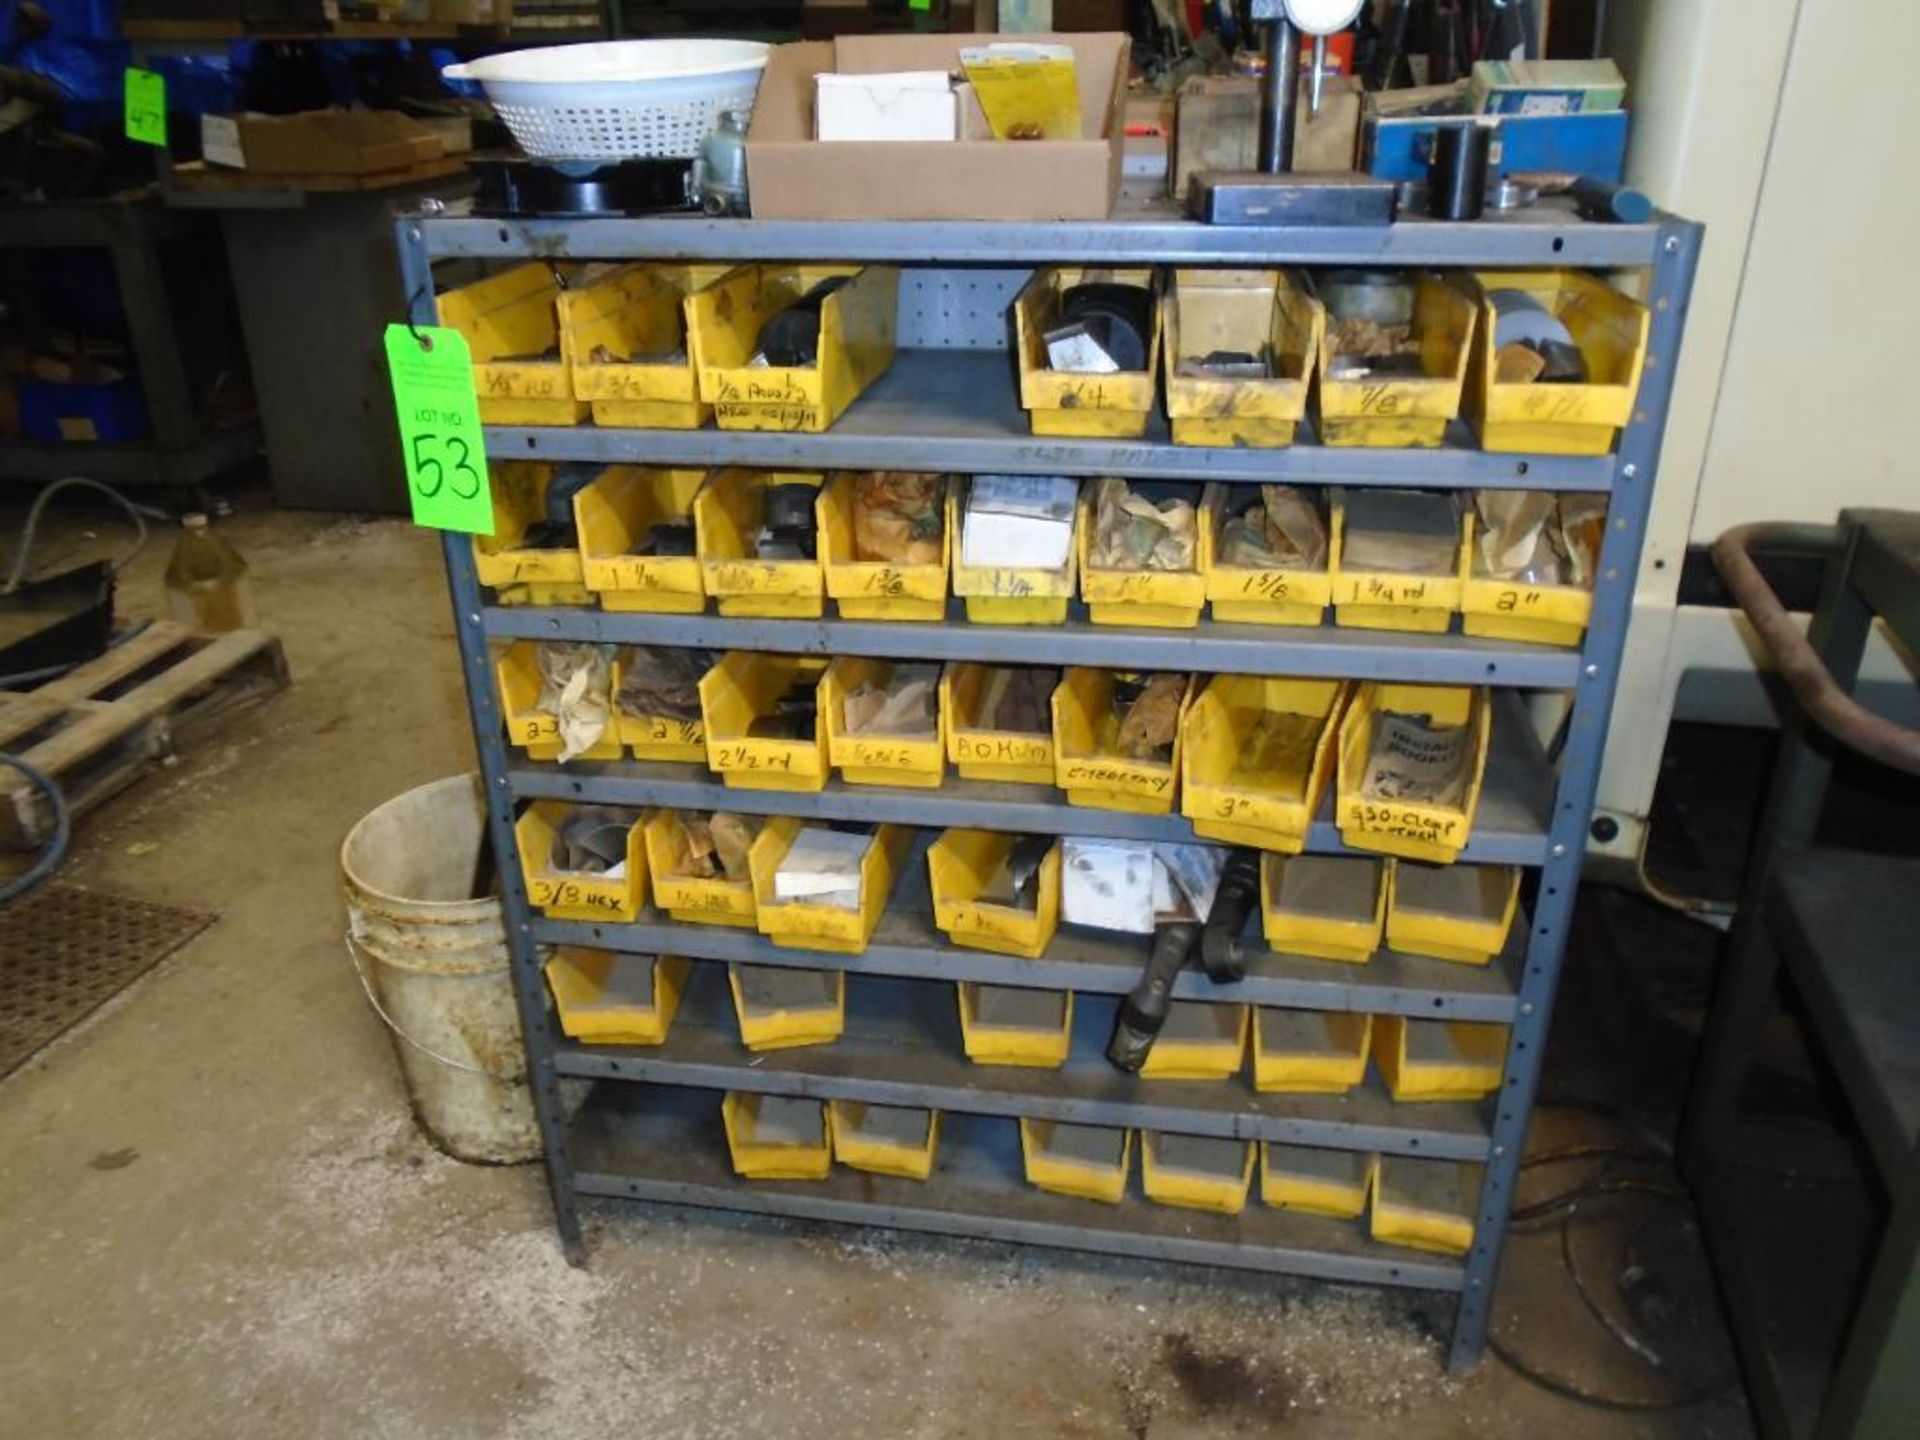 Shelving with Yellow Organizers - Contents Included